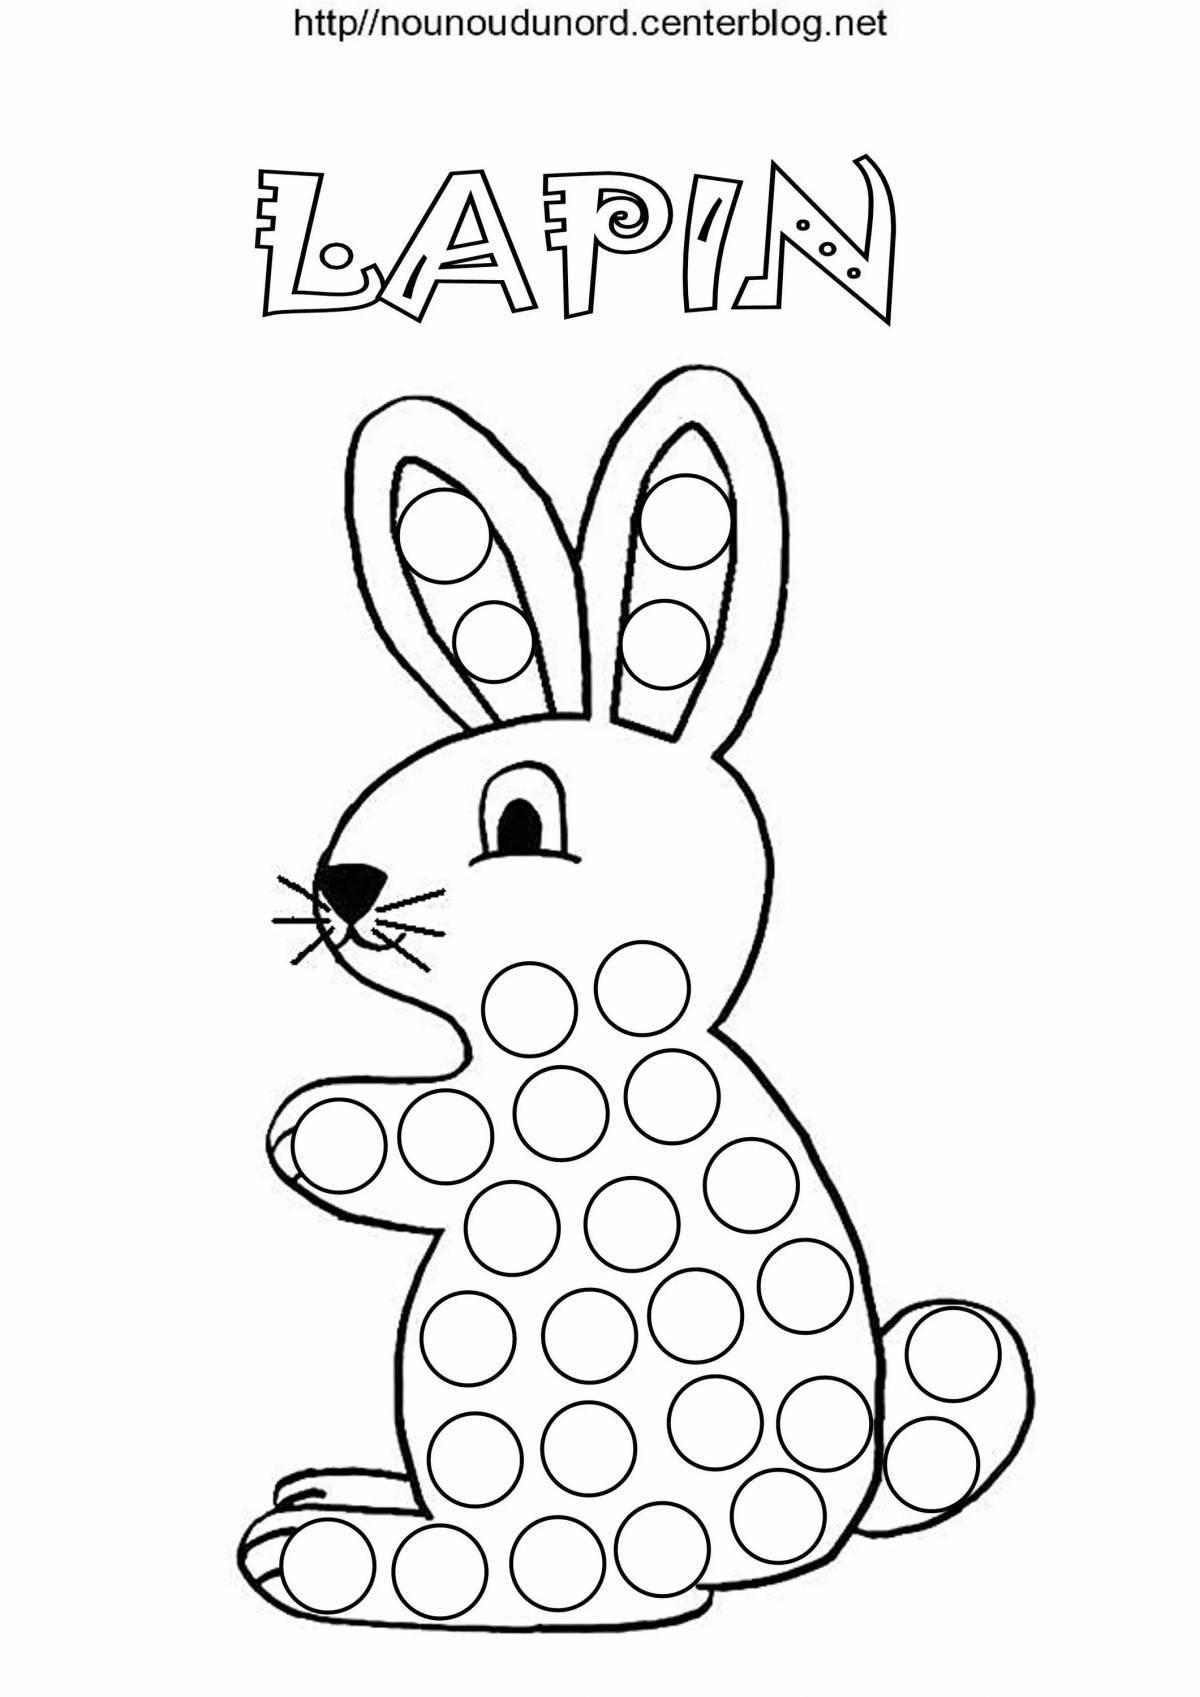 Colorful finger coloring page for 4-5 year olds